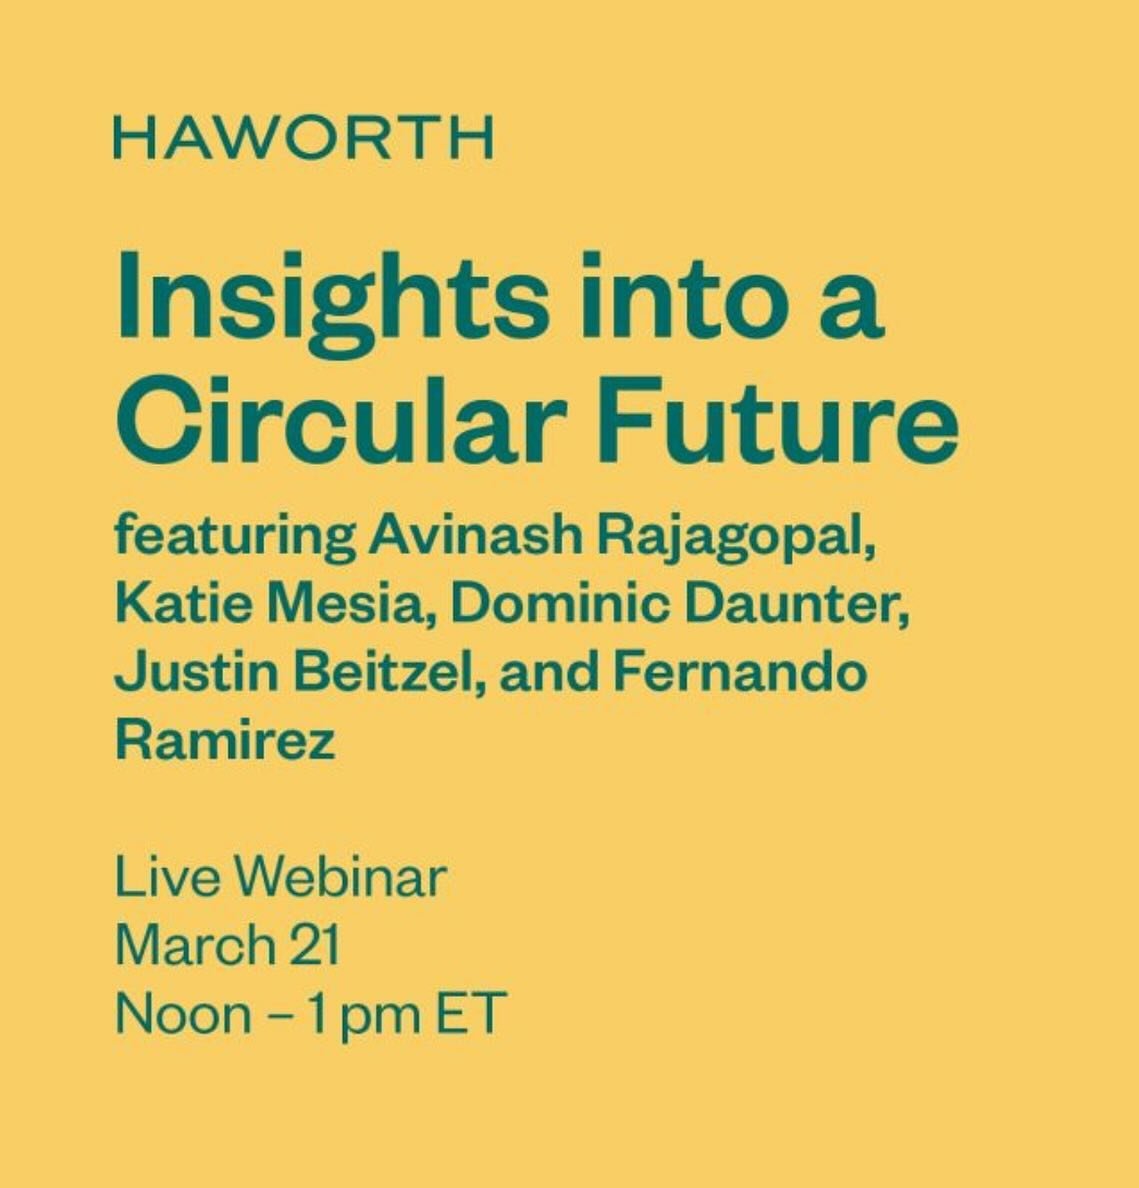 Thursday, March 21, Noon &ndash; 1 pm ET, tune in for a special panel discussion on the impact of circular design in the workplace. Avinash Rajagopal of Metropolis Magazine, Katie Mesia of Gensler, Dominic Daunter from Haworth, and Justin Beitzel &am